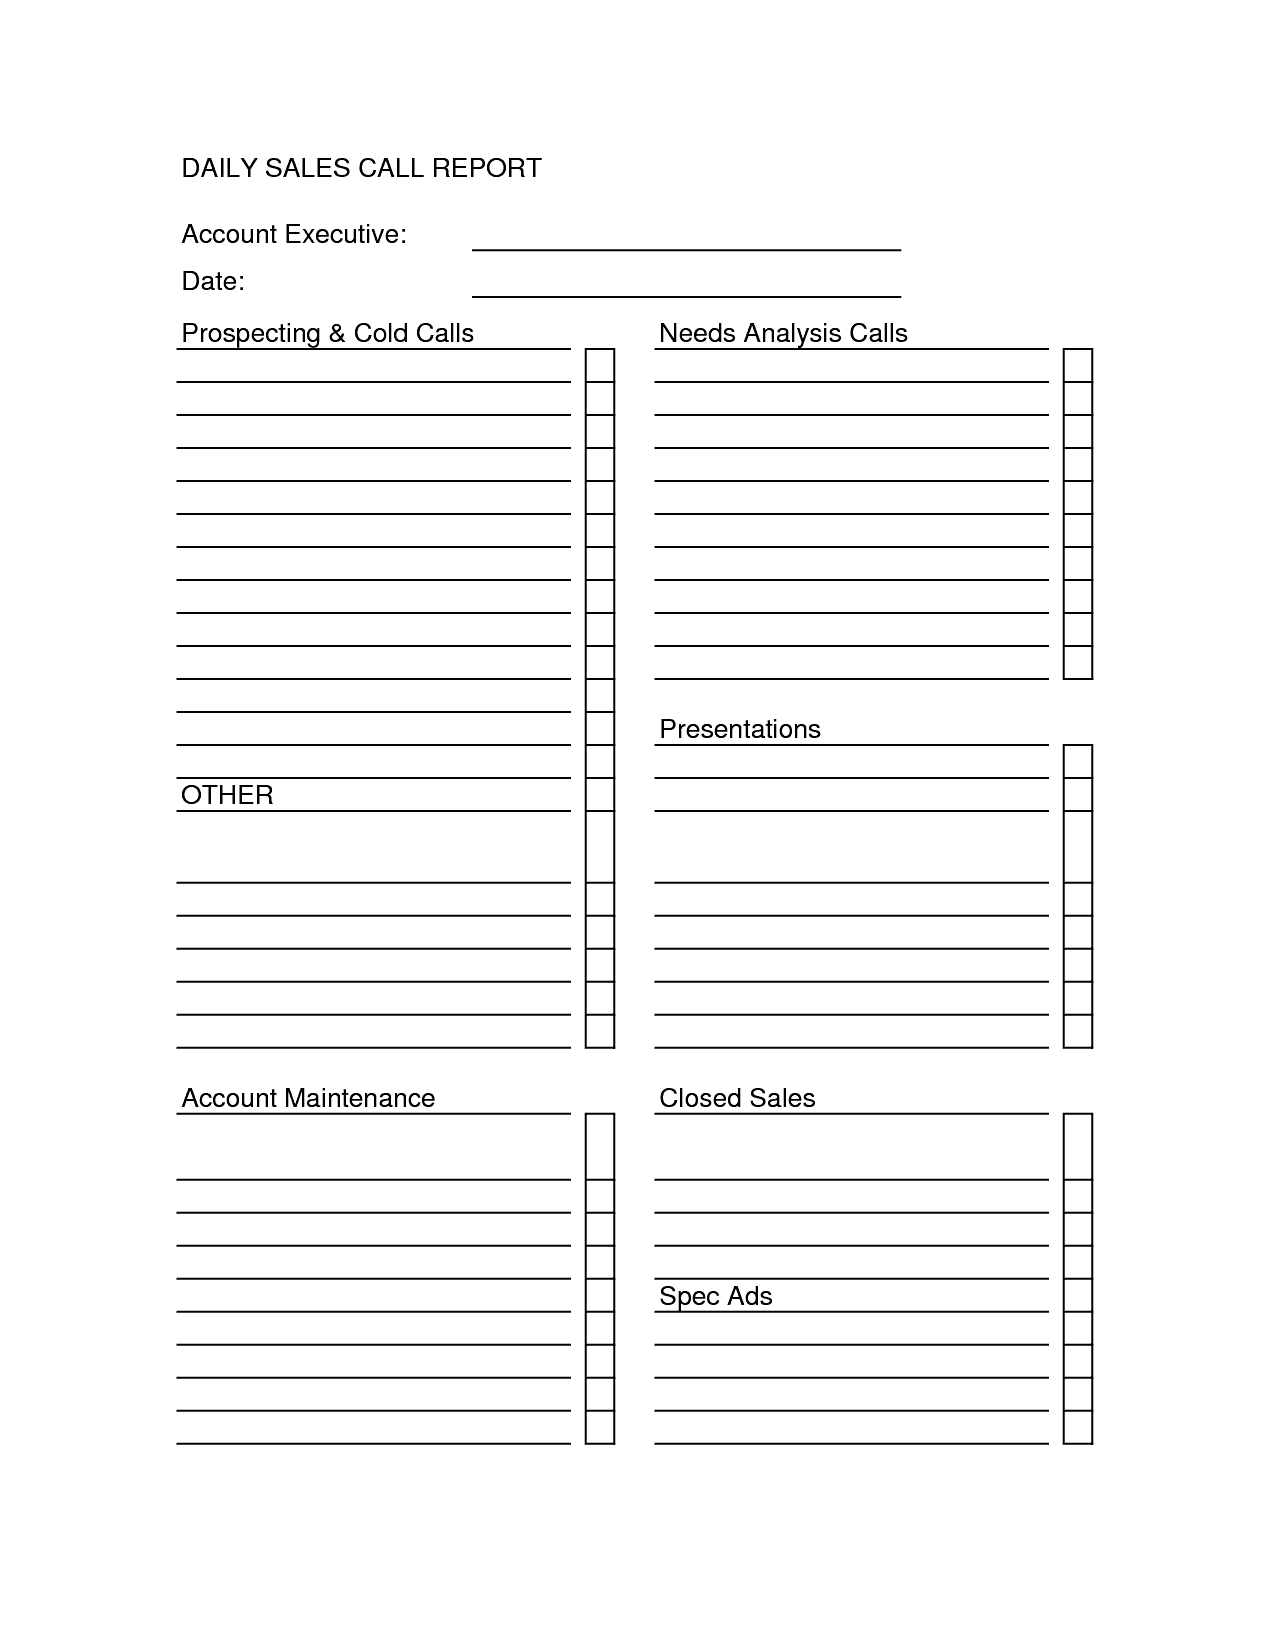 Sales Call Report Templates - Word Excel Fomats Inside Sales Call Report Template Free